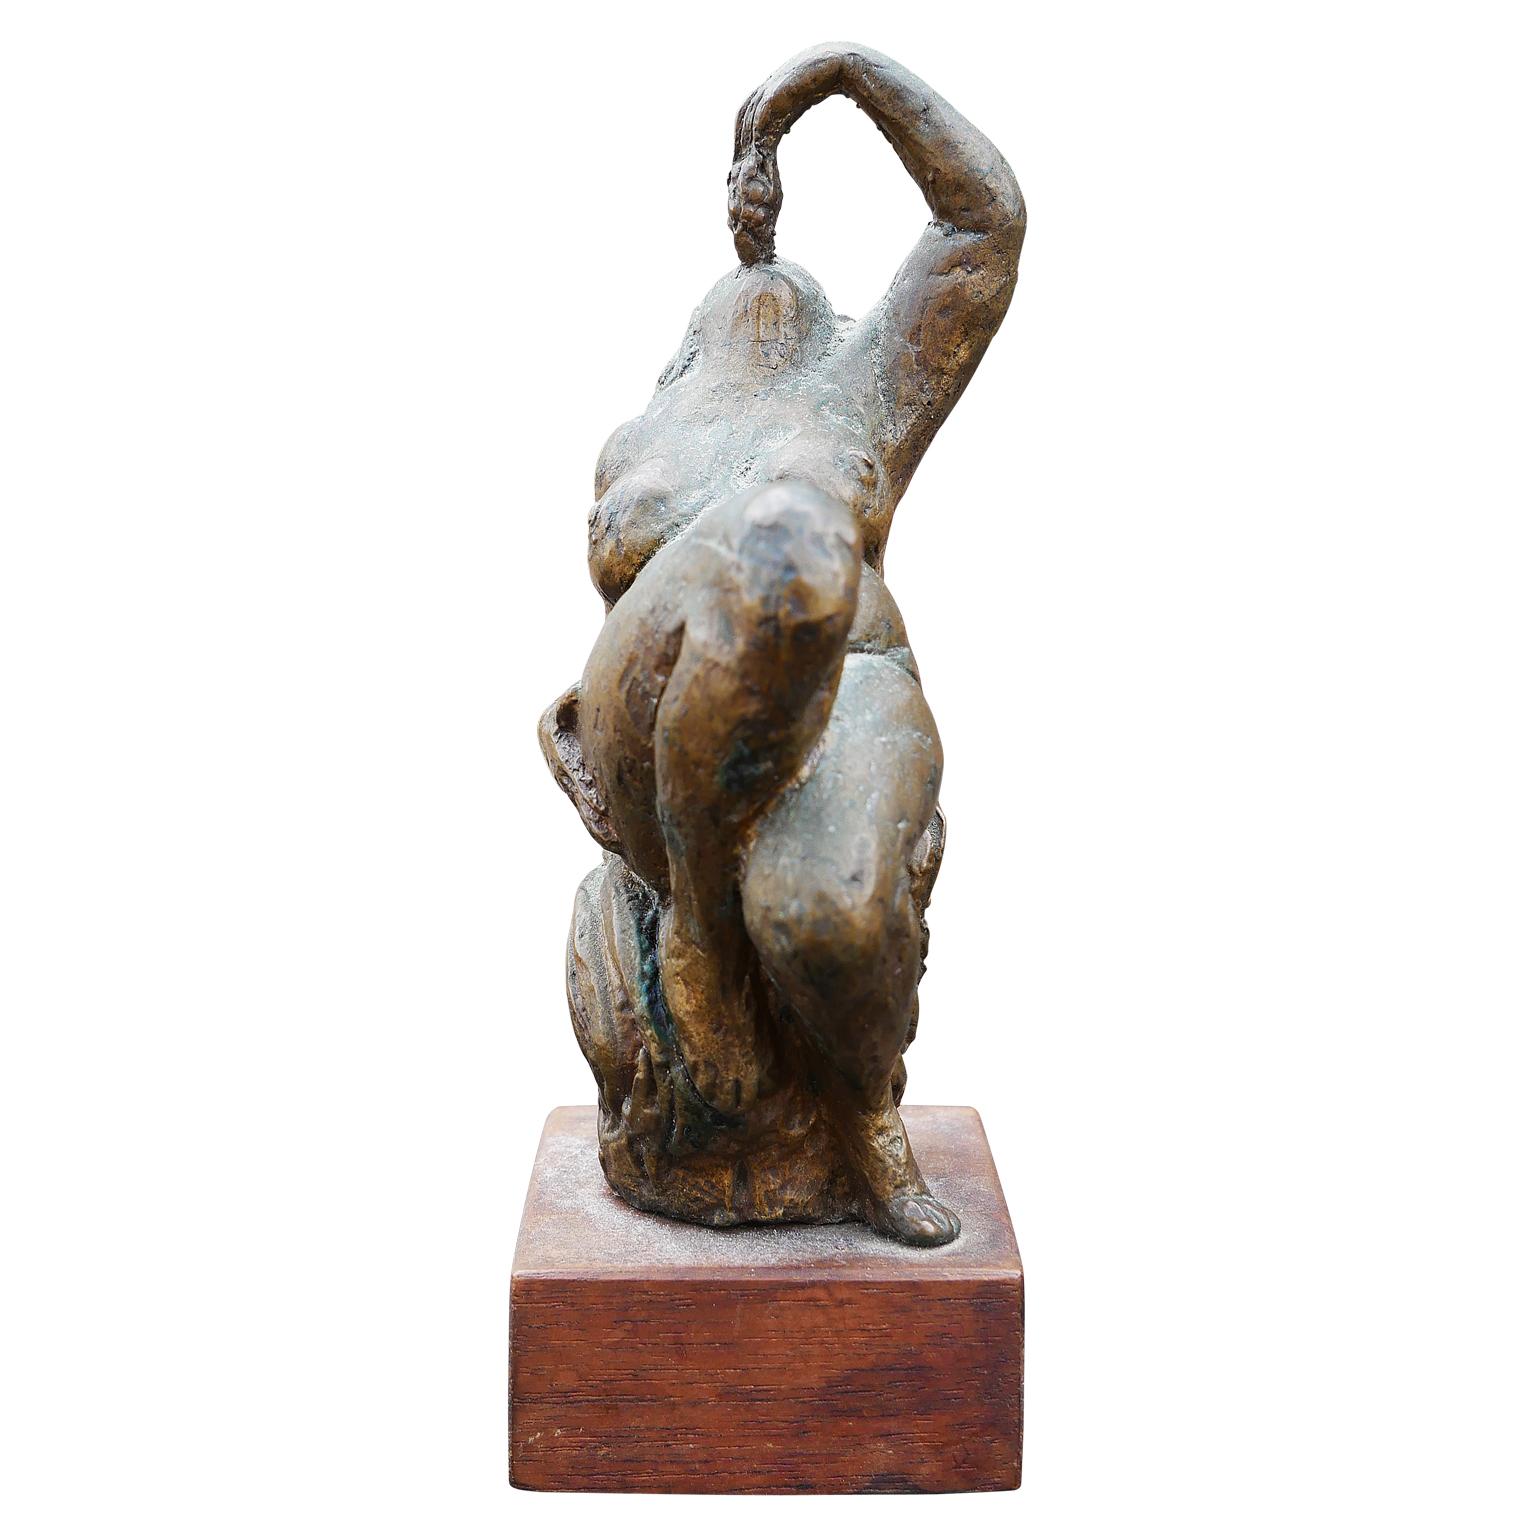 Modern Abstract Figurative Bronze Sculpture of Reclining Nude Female with Grapes - Brown Figurative Sculpture by James Kearns